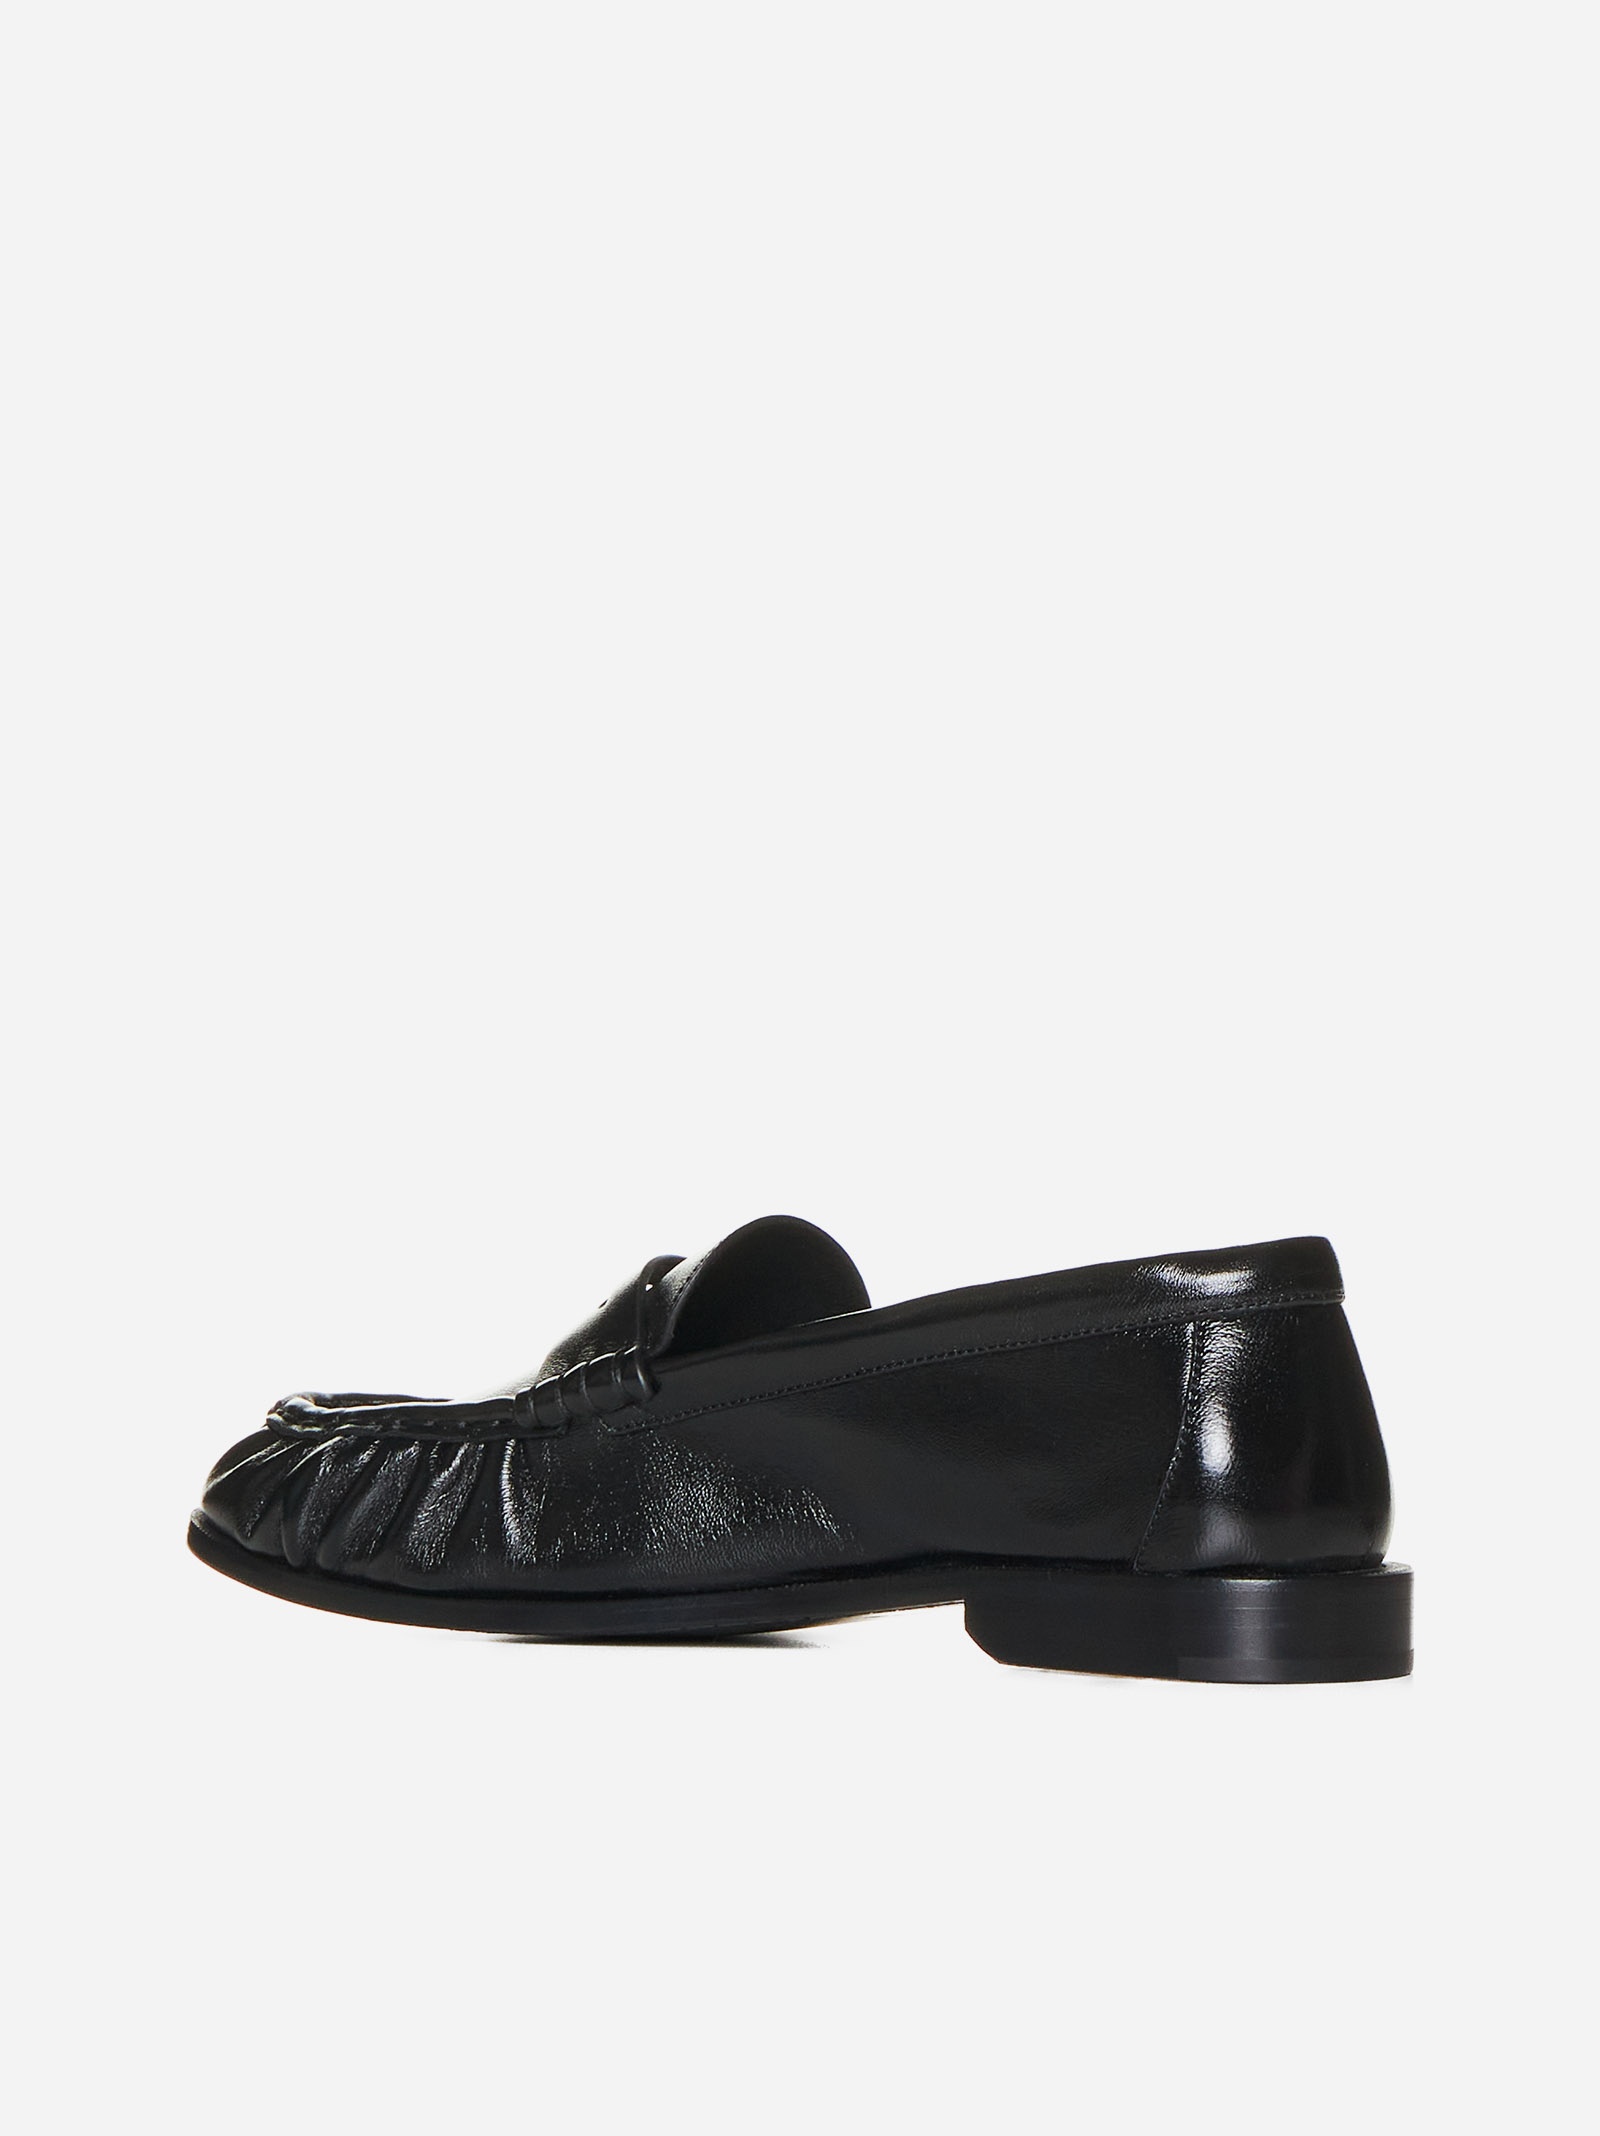 YSL logo leather loafers - 3